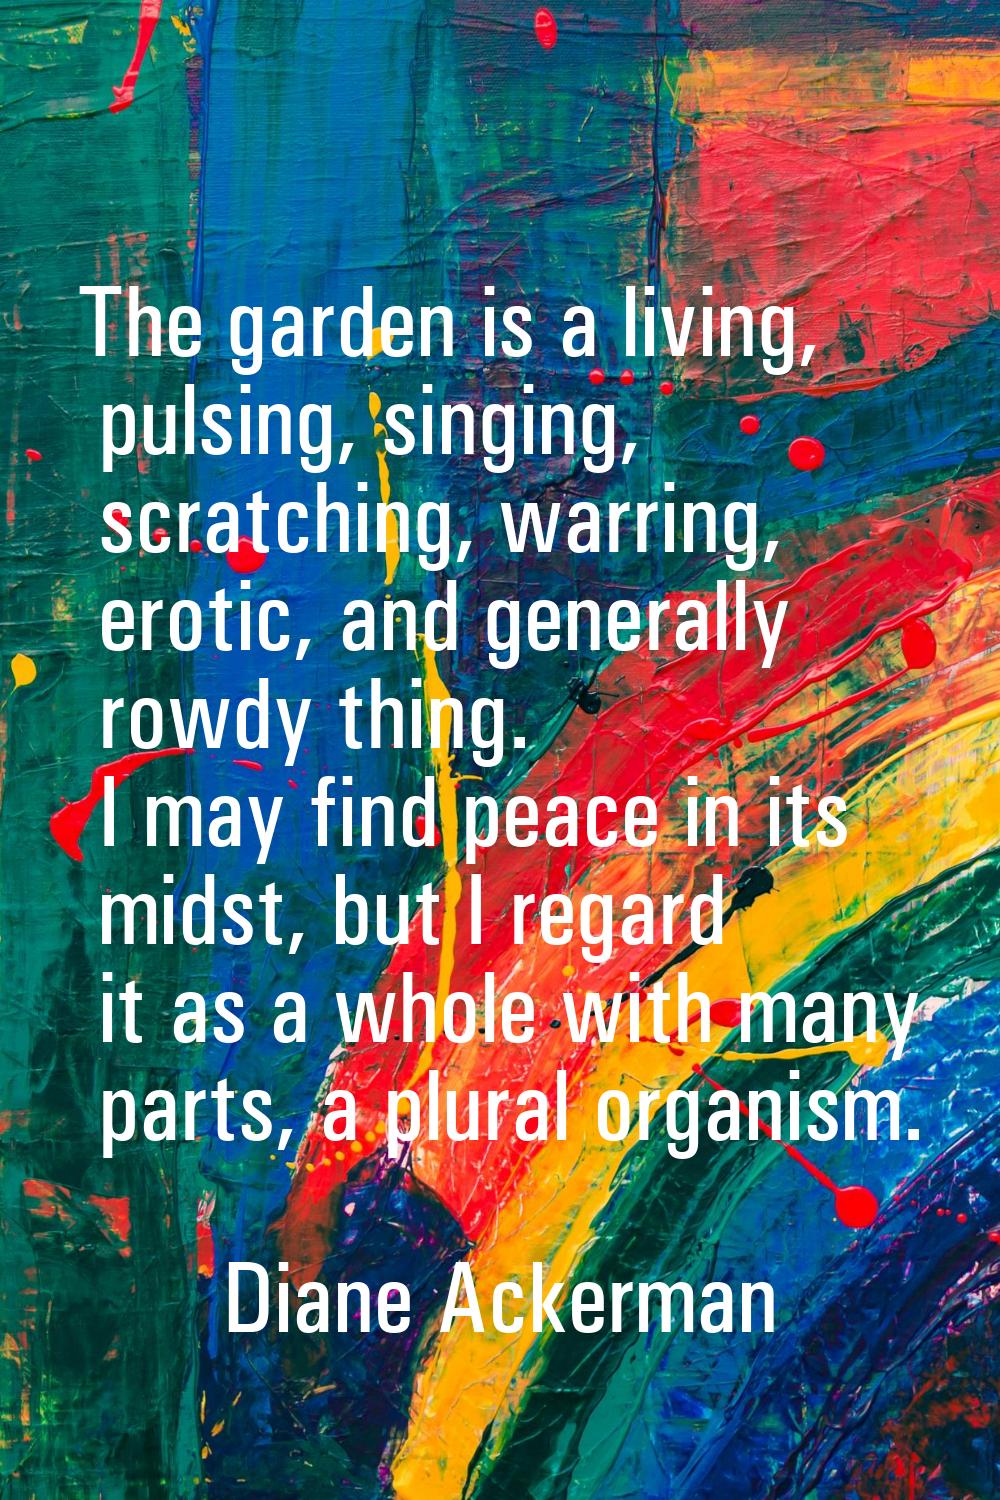 The garden is a living, pulsing, singing, scratching, warring, erotic, and generally rowdy thing. I